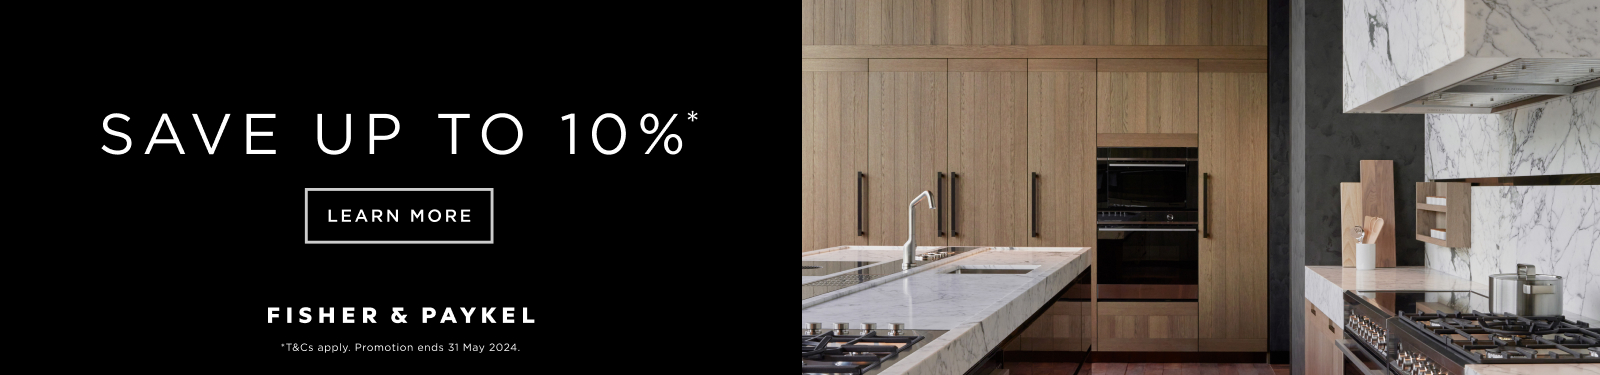 Save Up To 10% On Selected Fisher & Paykel Appliances at Retravision